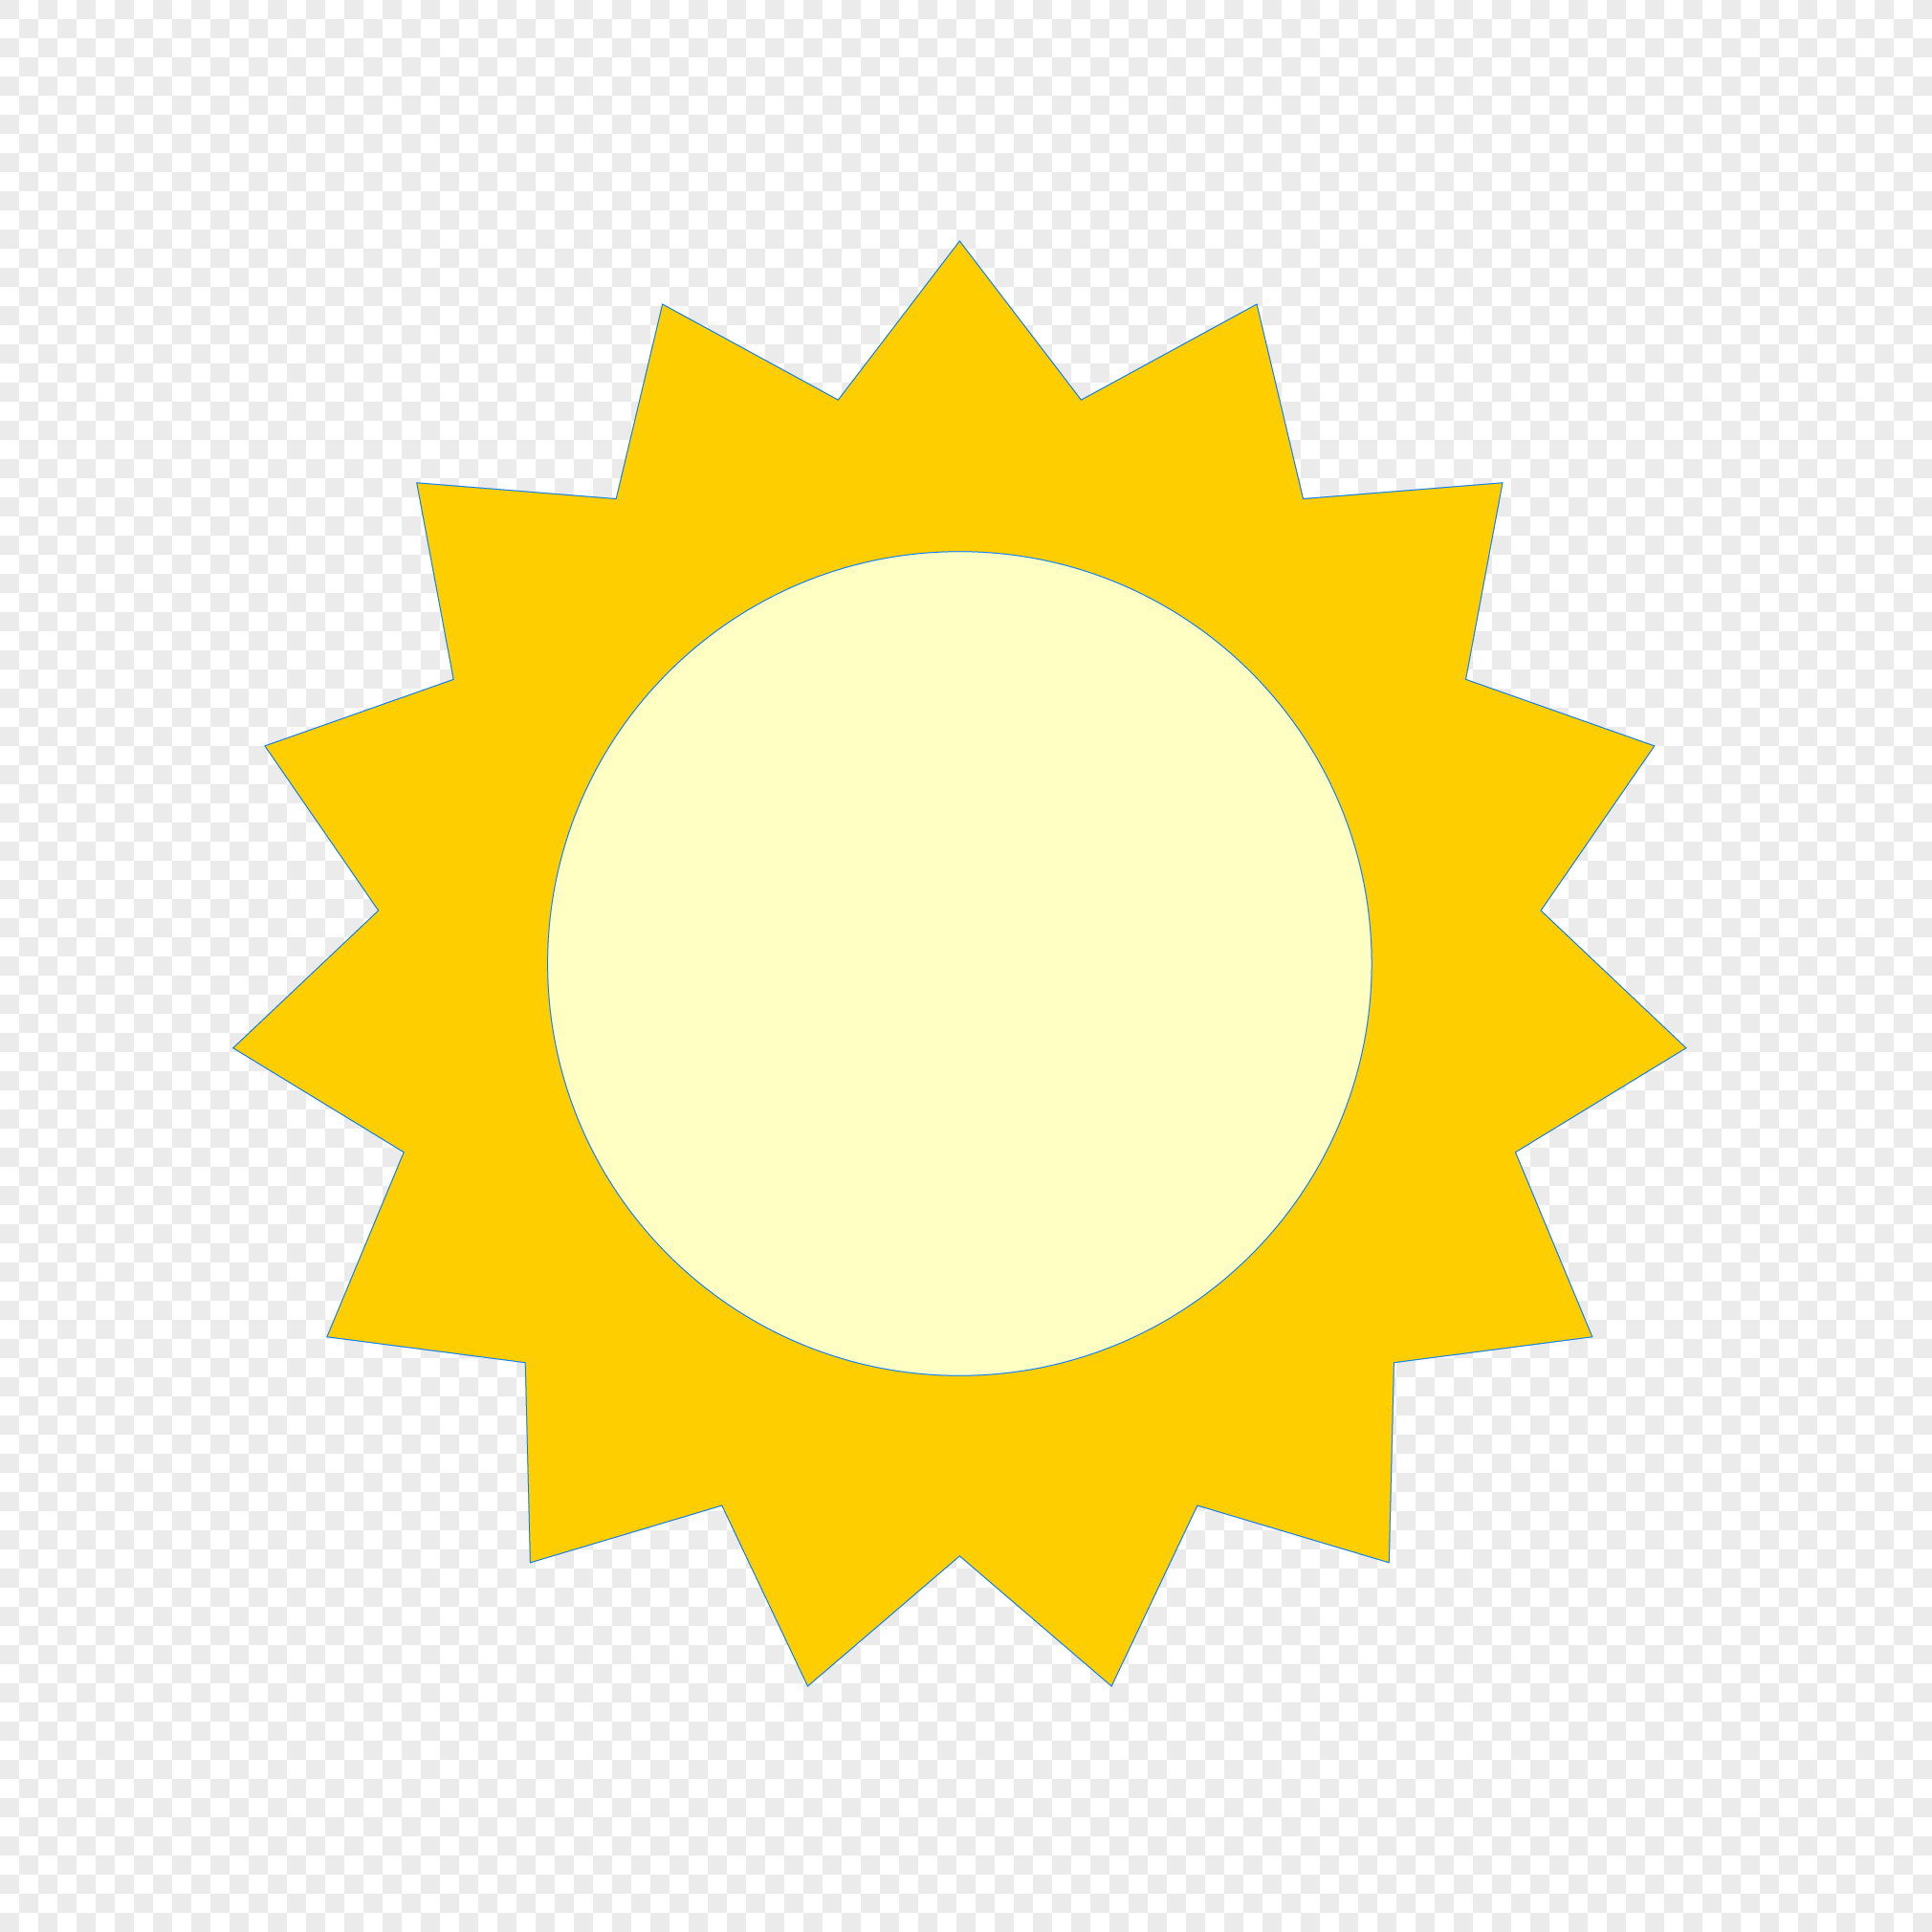 Painted Sun Logo - Cartoon hand painted sun png image_picture free download ...